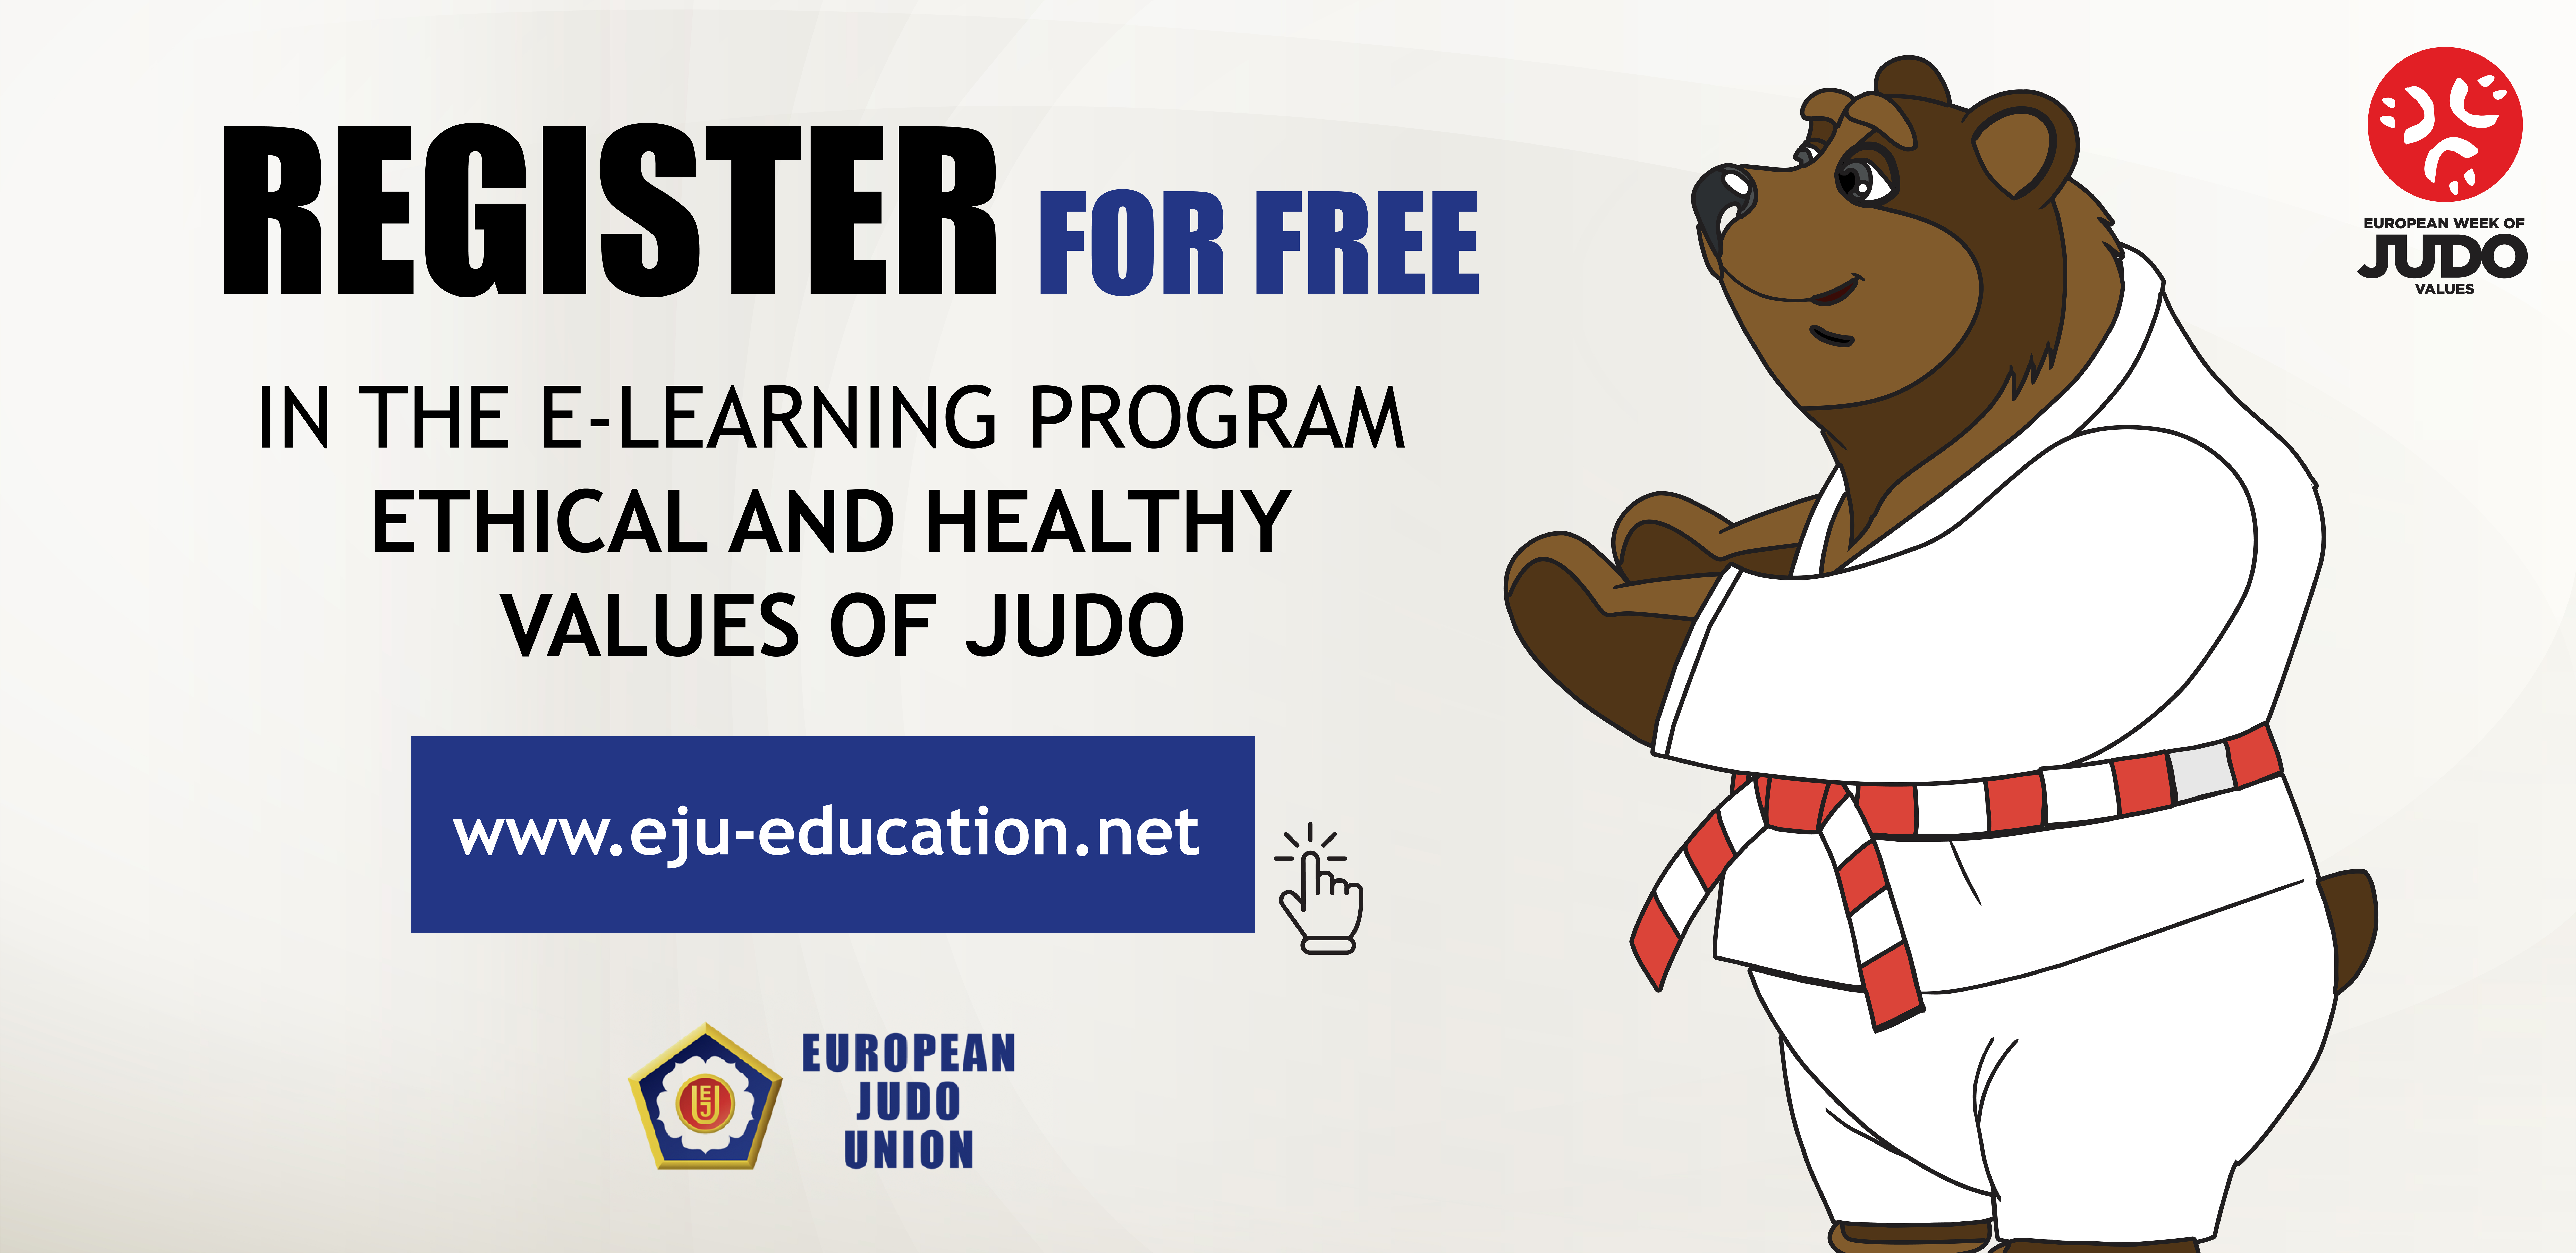 EUROPEAN WEEK OF JUDO VALUES EDUCATION COURSE IS LIVE